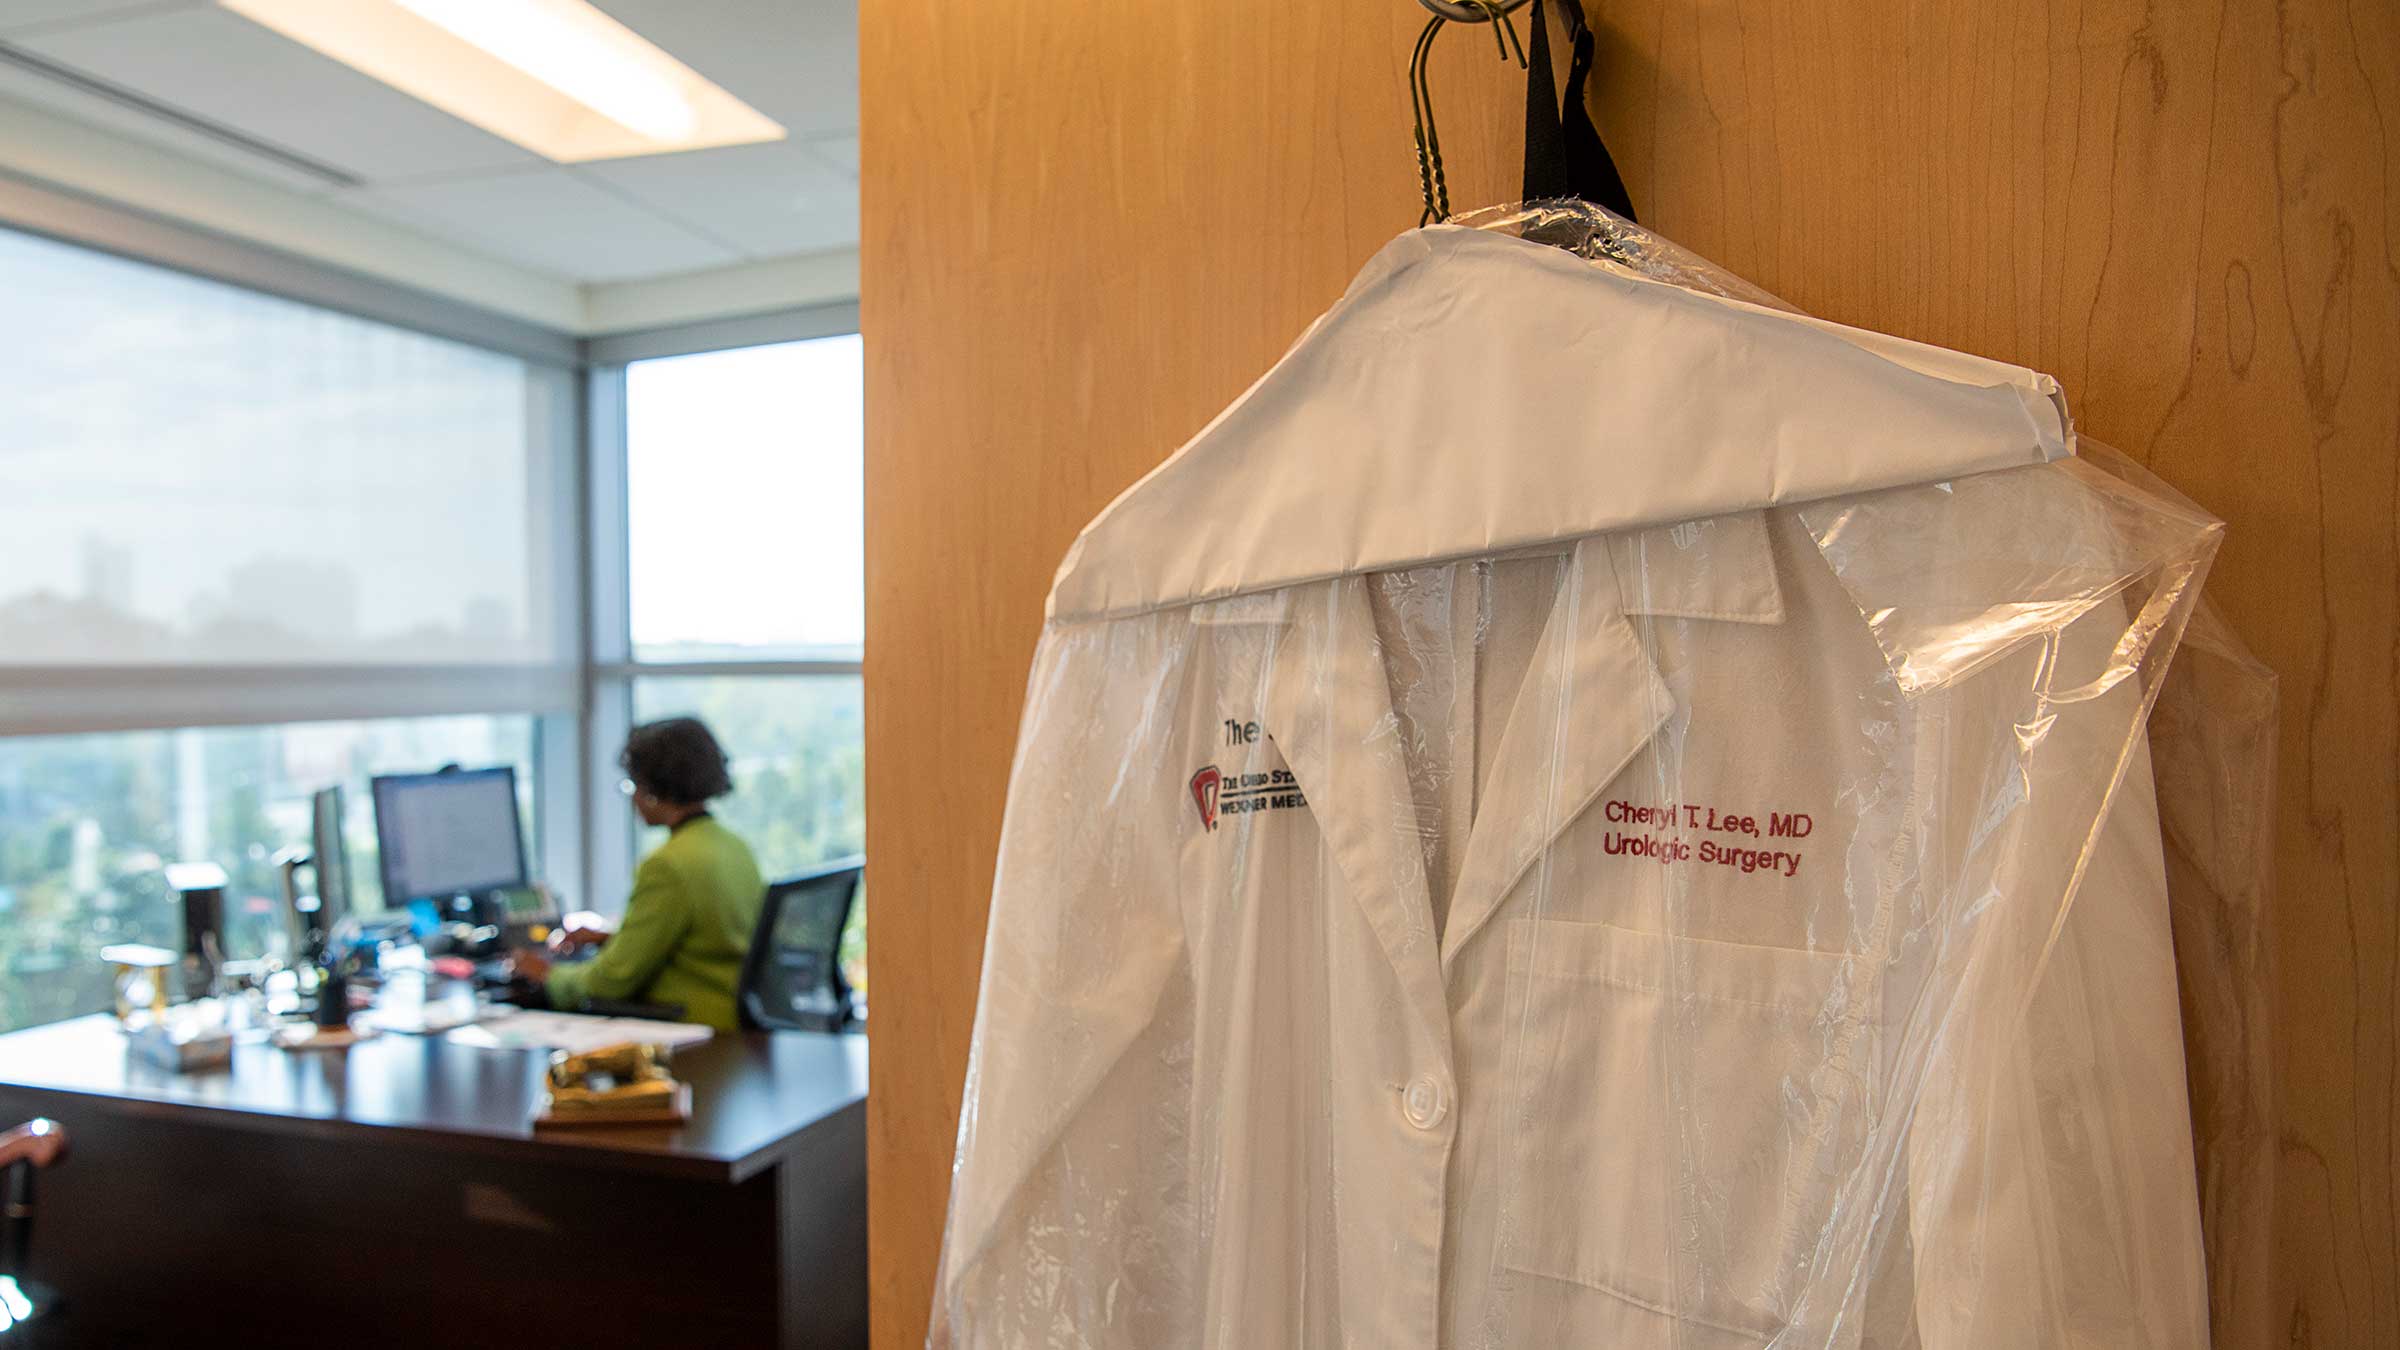 Dr. Cheryl Lee’s white doctor’s coat hung on a door in her office